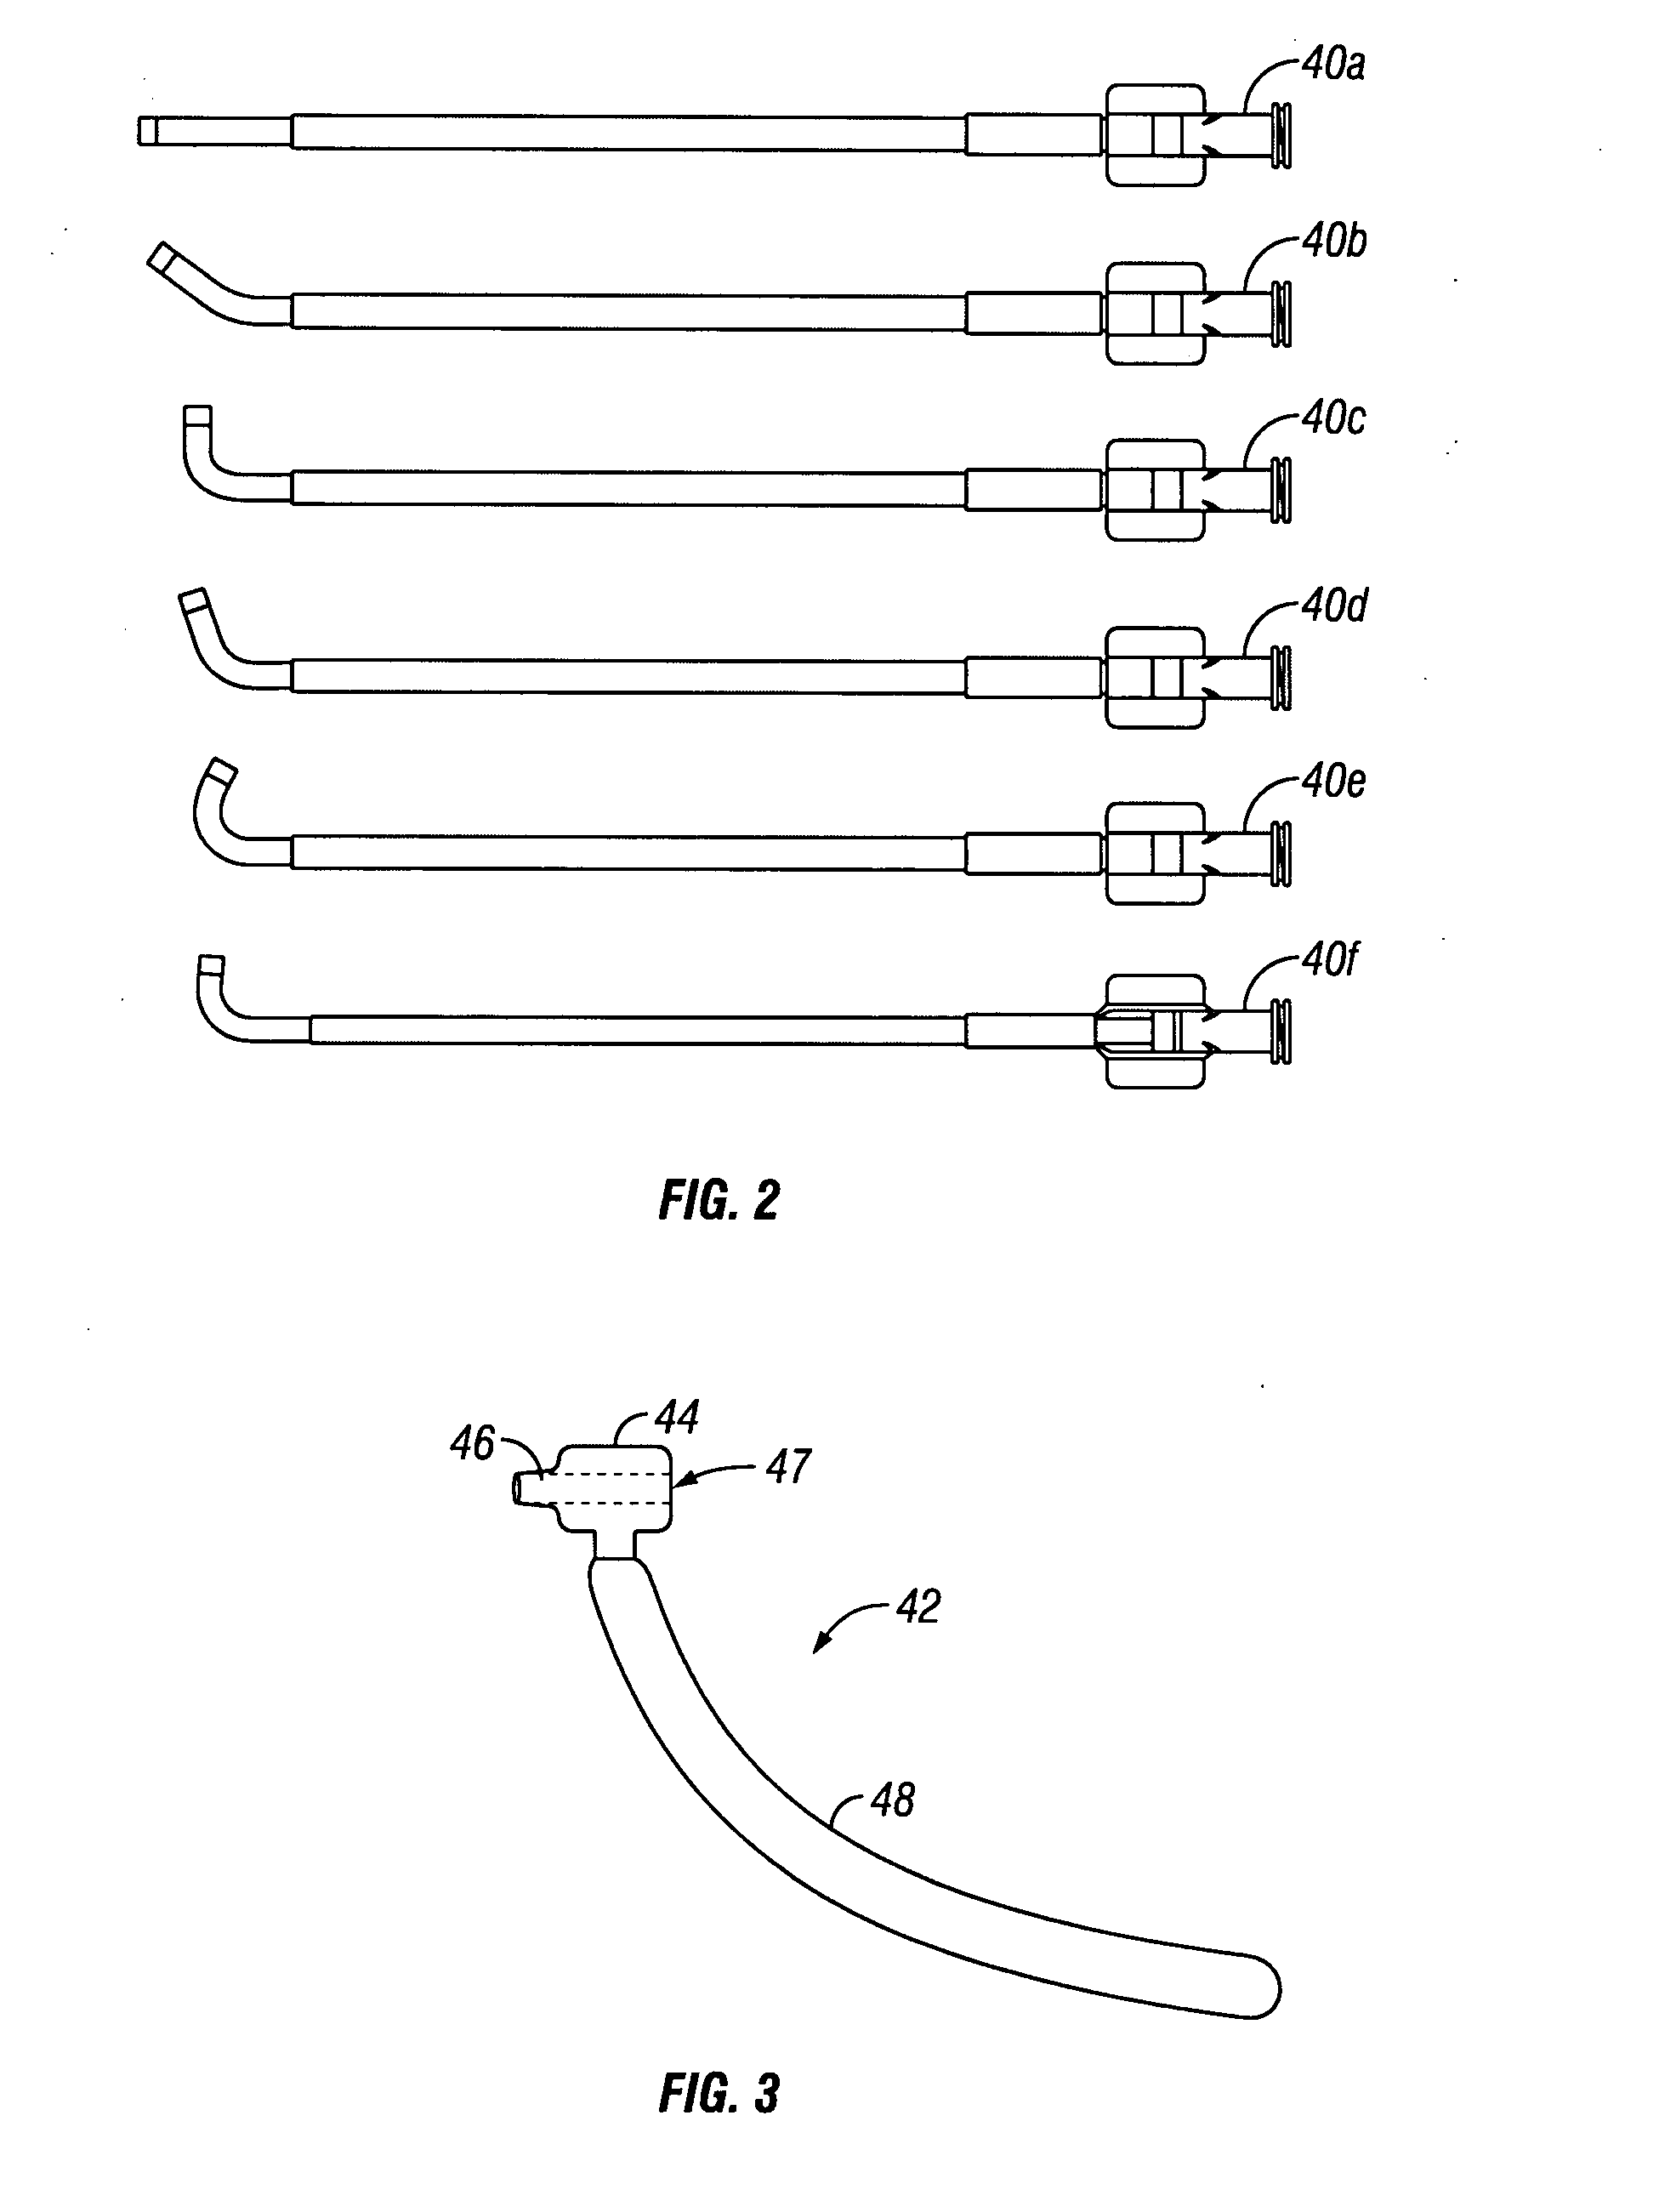 Systems and methods for transnasal dilation of passageways in the ear, nose and throat